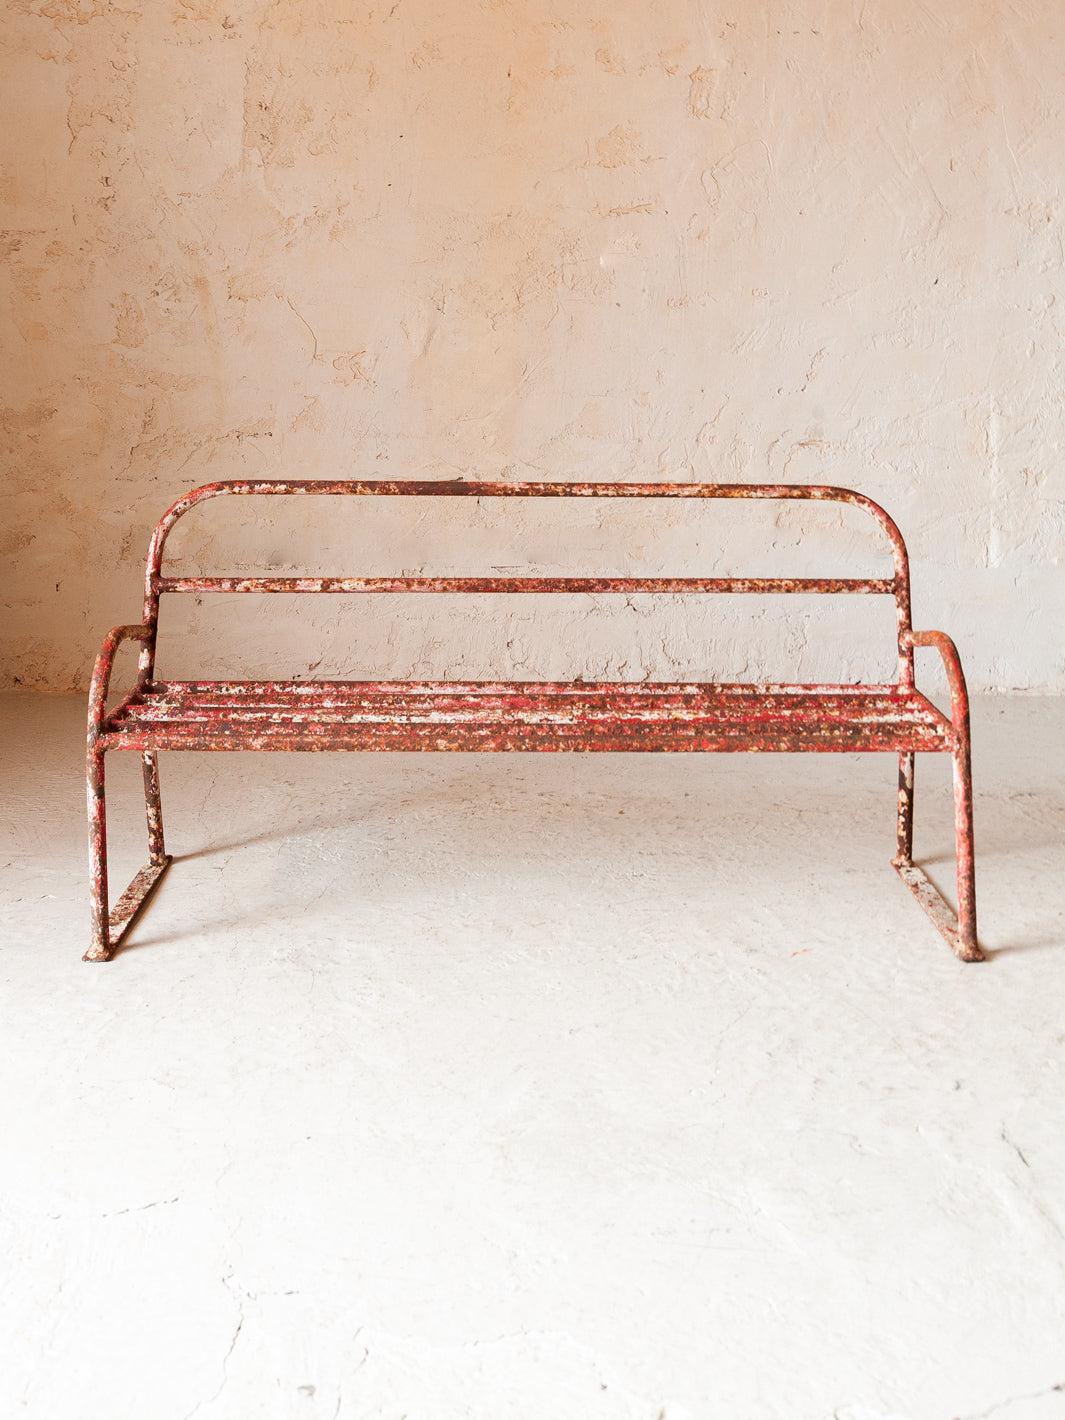 Uncle Vivo mini bench from the 50s